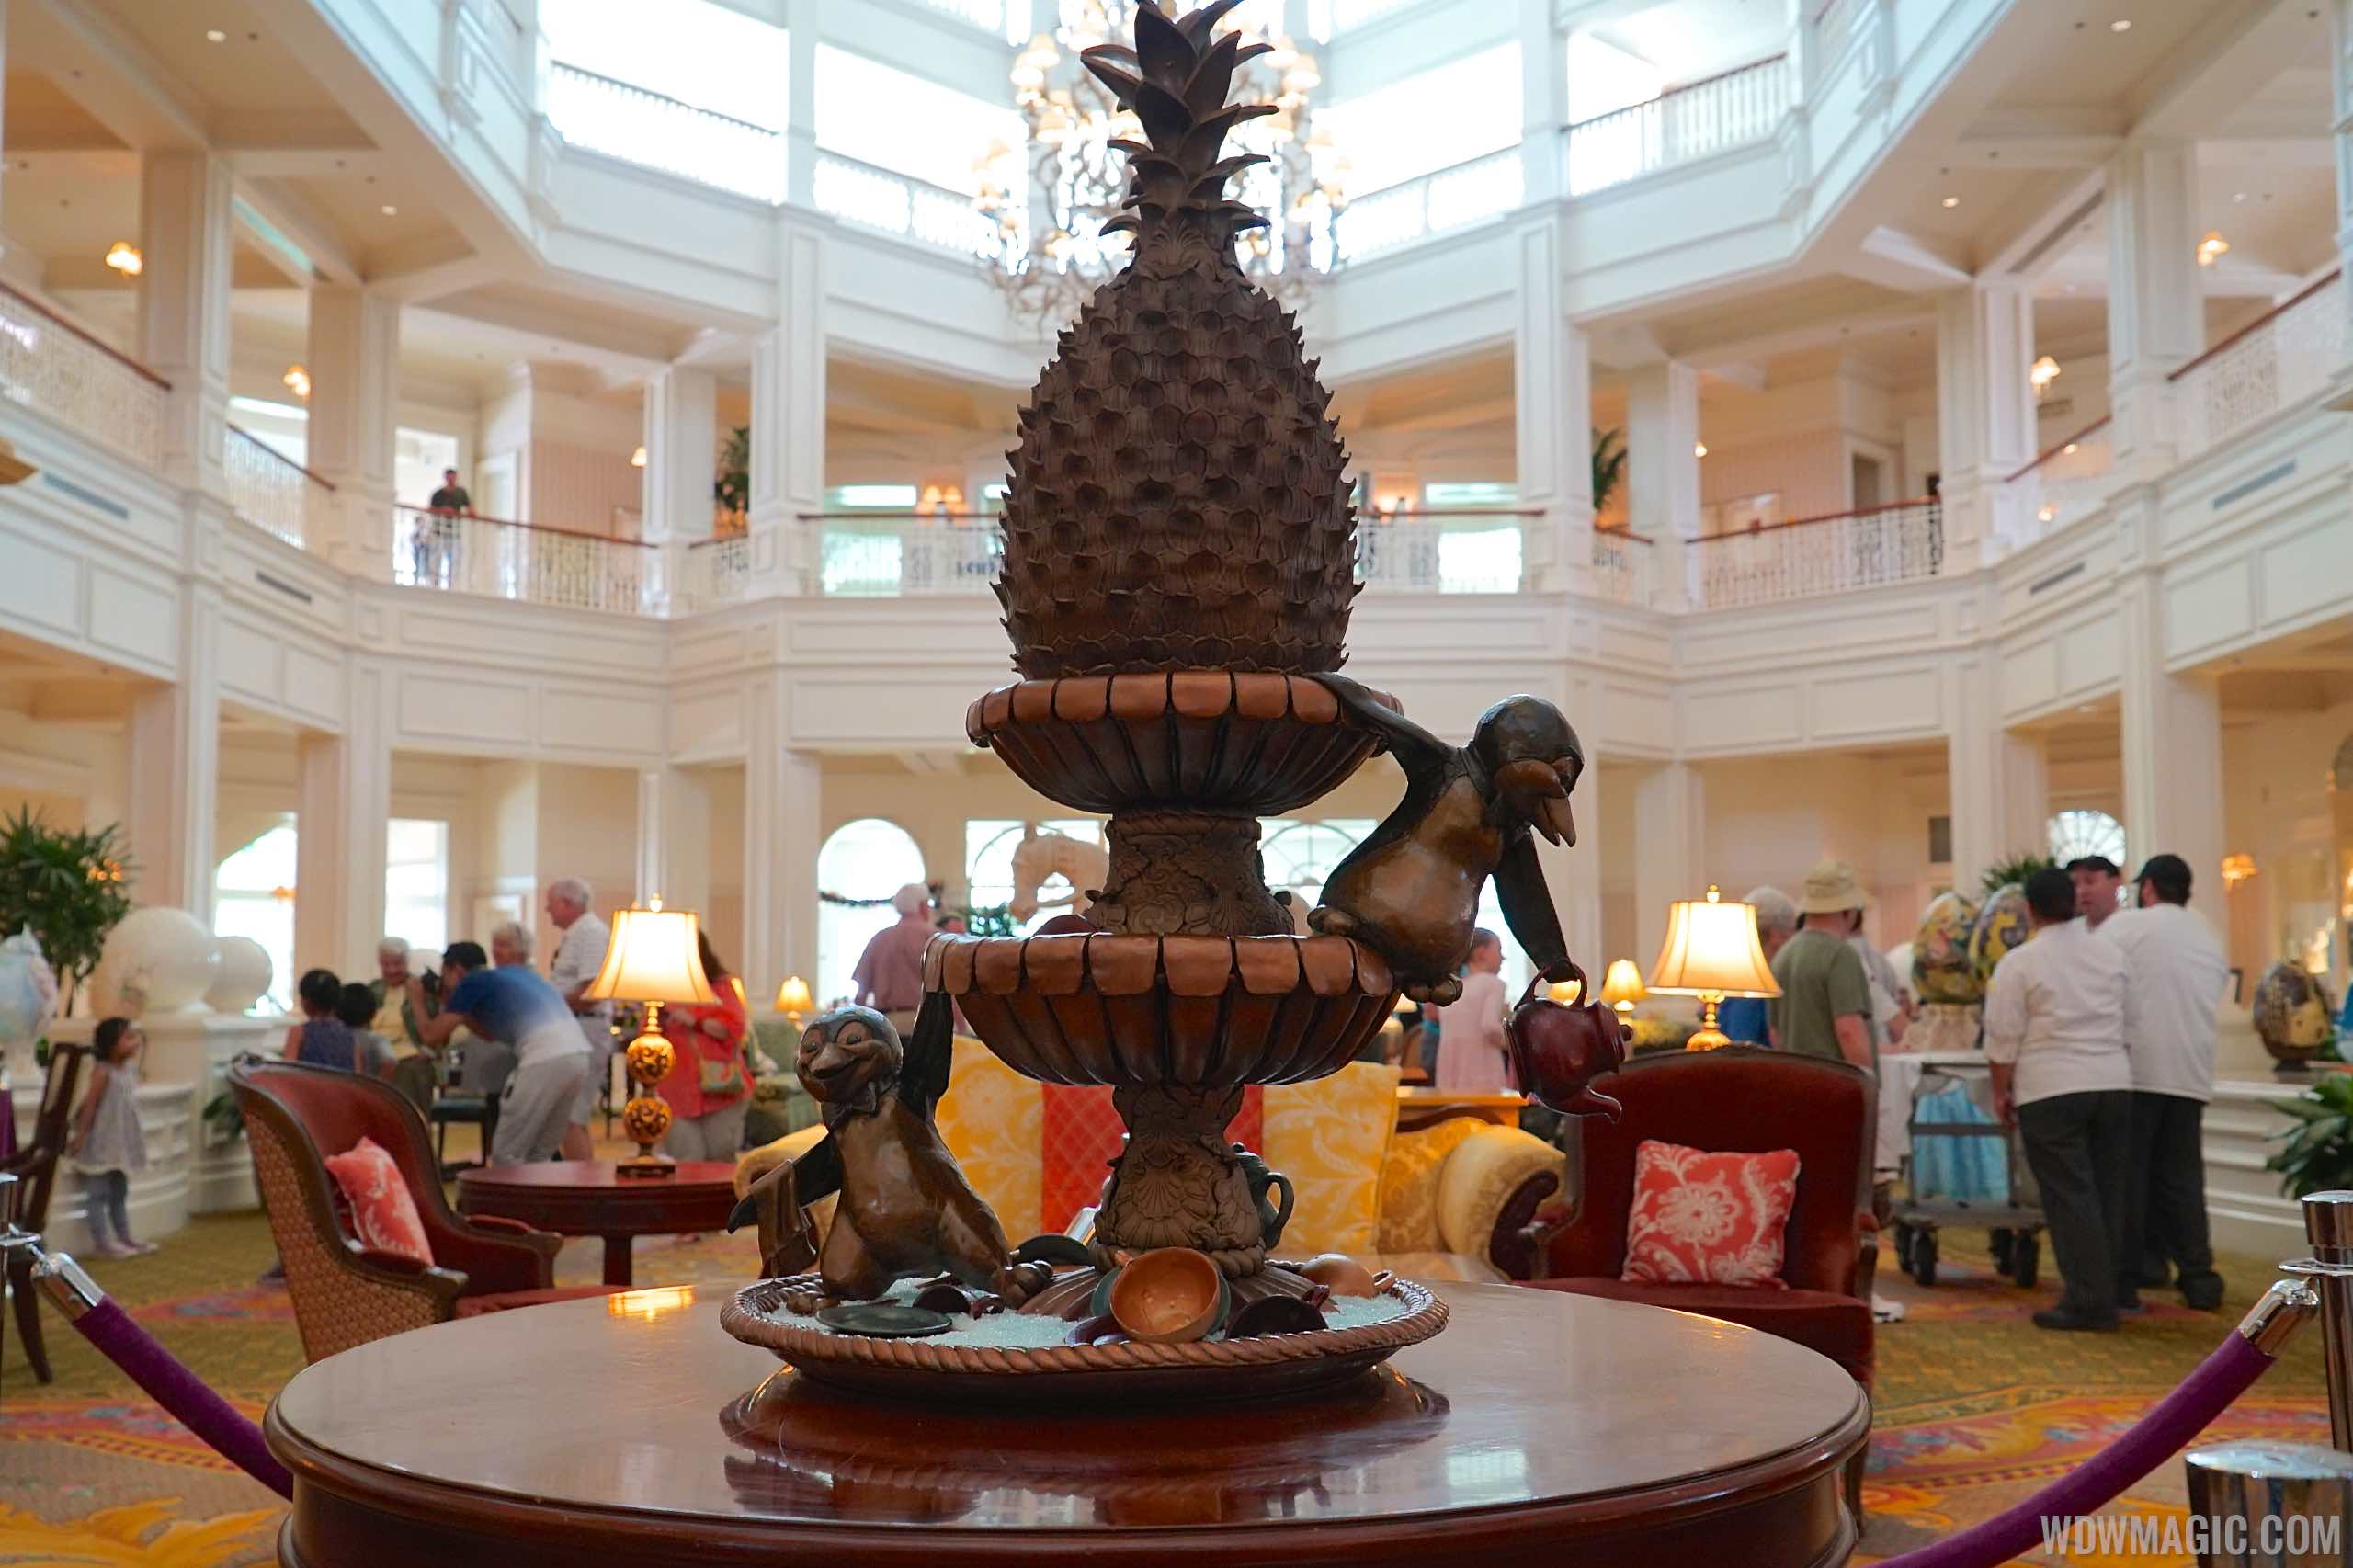 PHOTOS Easter Egg creations now on display at Disney's Grand